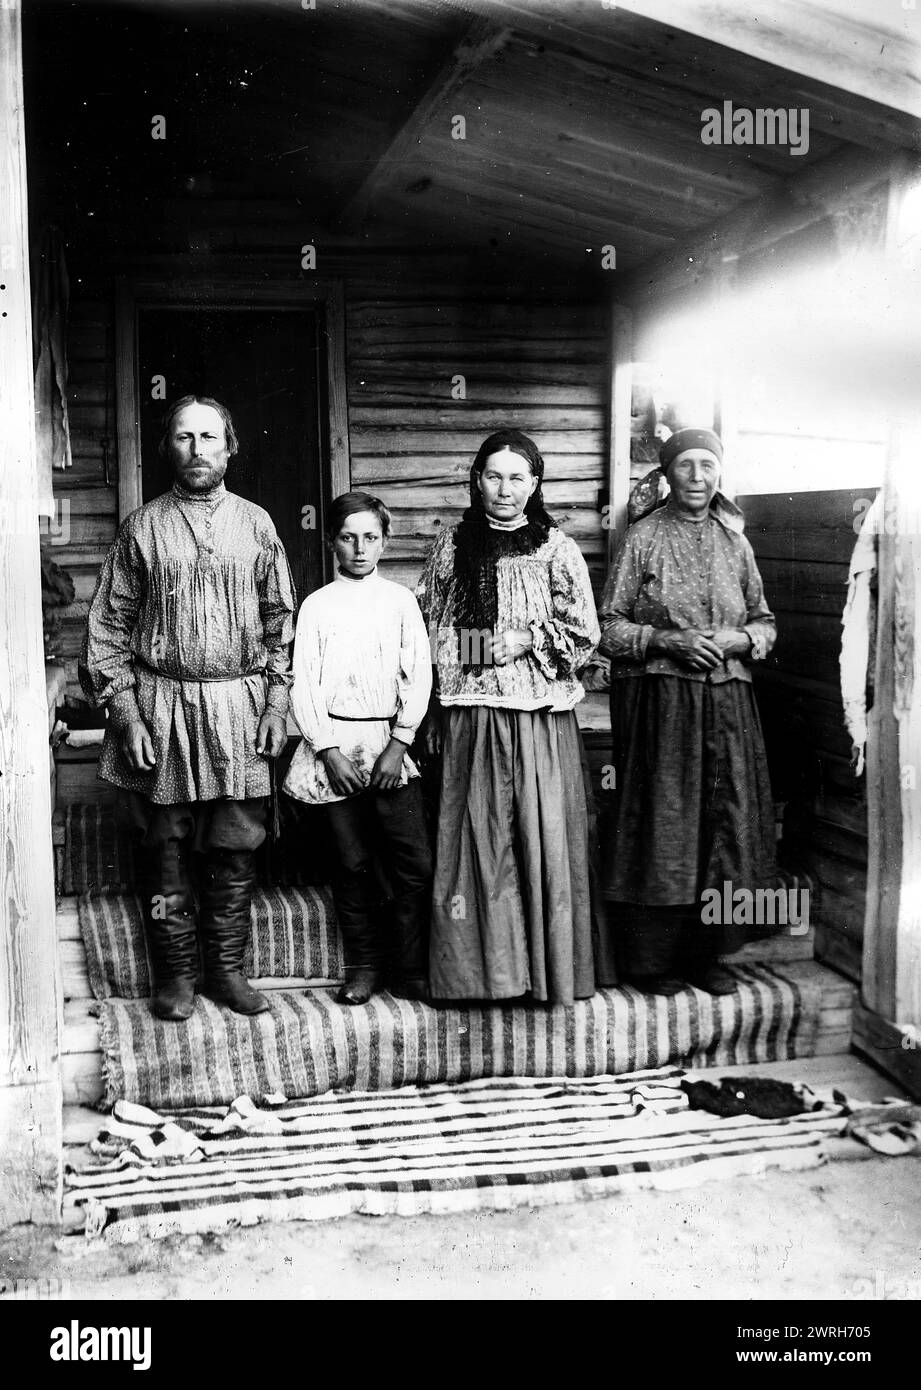 A peasant family from the village of Lovatskaya, Kansky district, 1905. This collection includes more than four hundred photographs of daily life in Yenisei Province in the late tsarist period. Photographs include peasants, Cossacks, and high-ranking officials. Krasnoiarsk Krai Museum of Regional History and Folklife Stock Photo